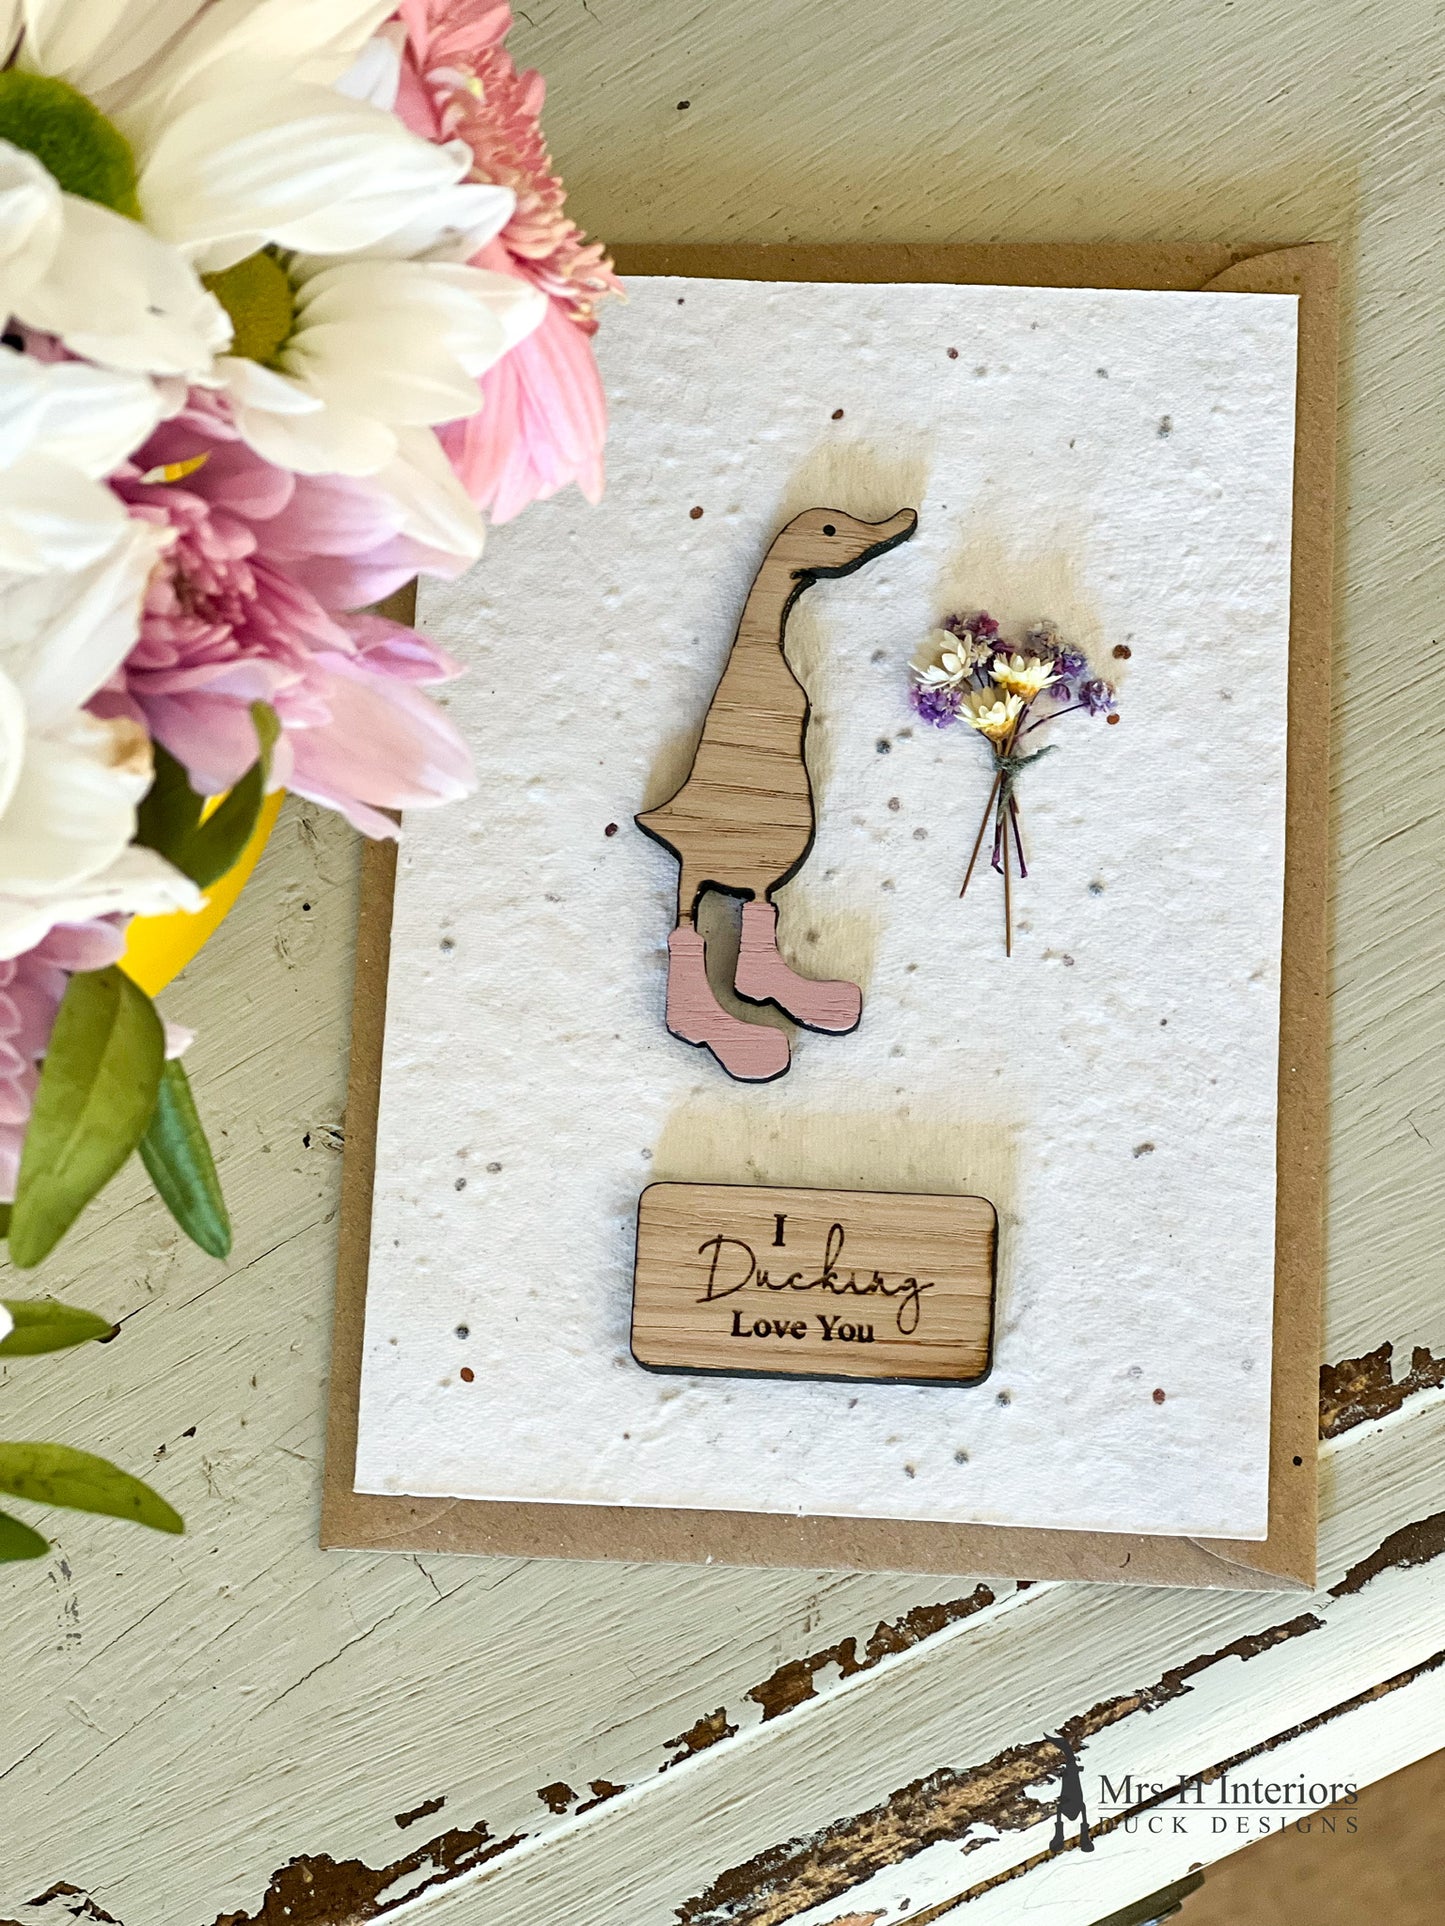 I Ducking Love You - Duck with Flowers - Greetings Card - Decorated Wooden Duck in Boots by Mrs H the Duck Lady